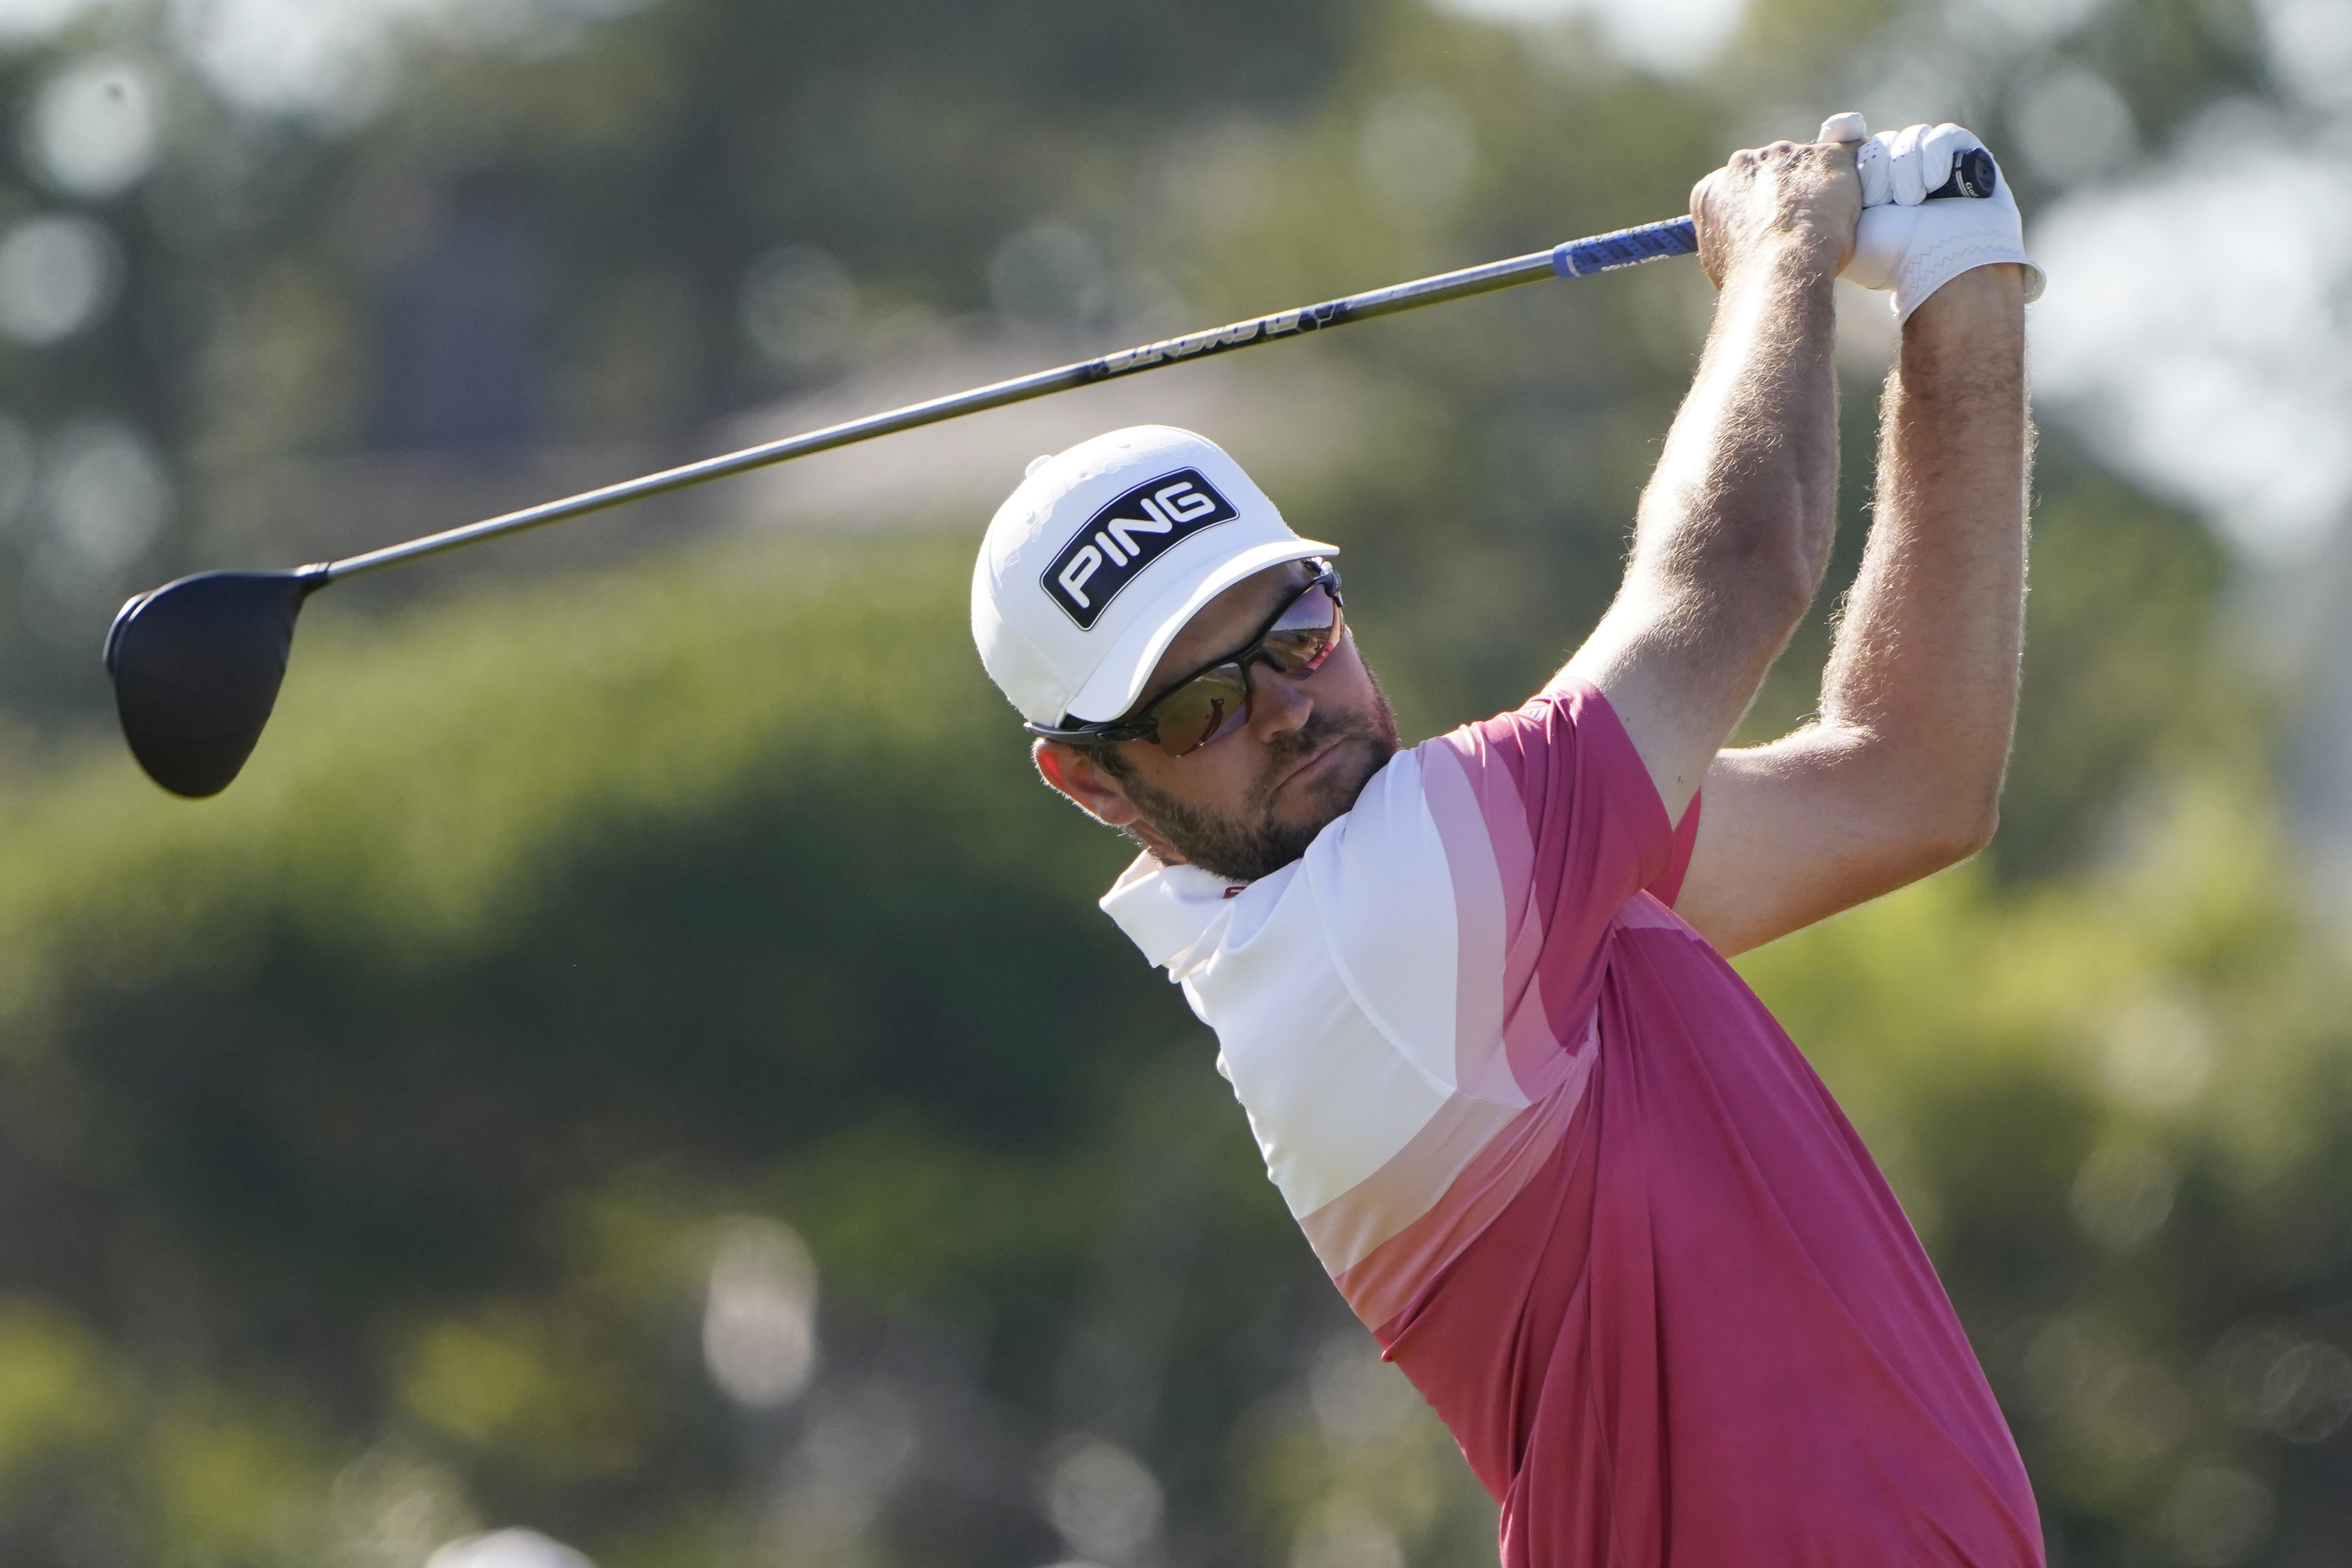 PGA Championship 2021 Round 2 free live stream (5/21/21) How to watch, golf tee times, live updates